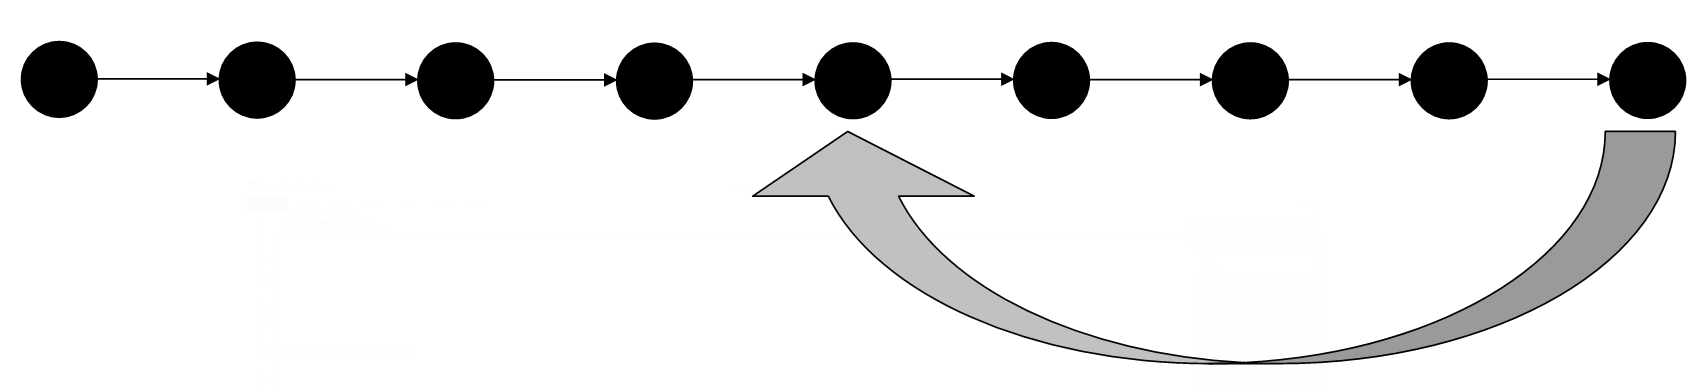 An illustration of a master branch